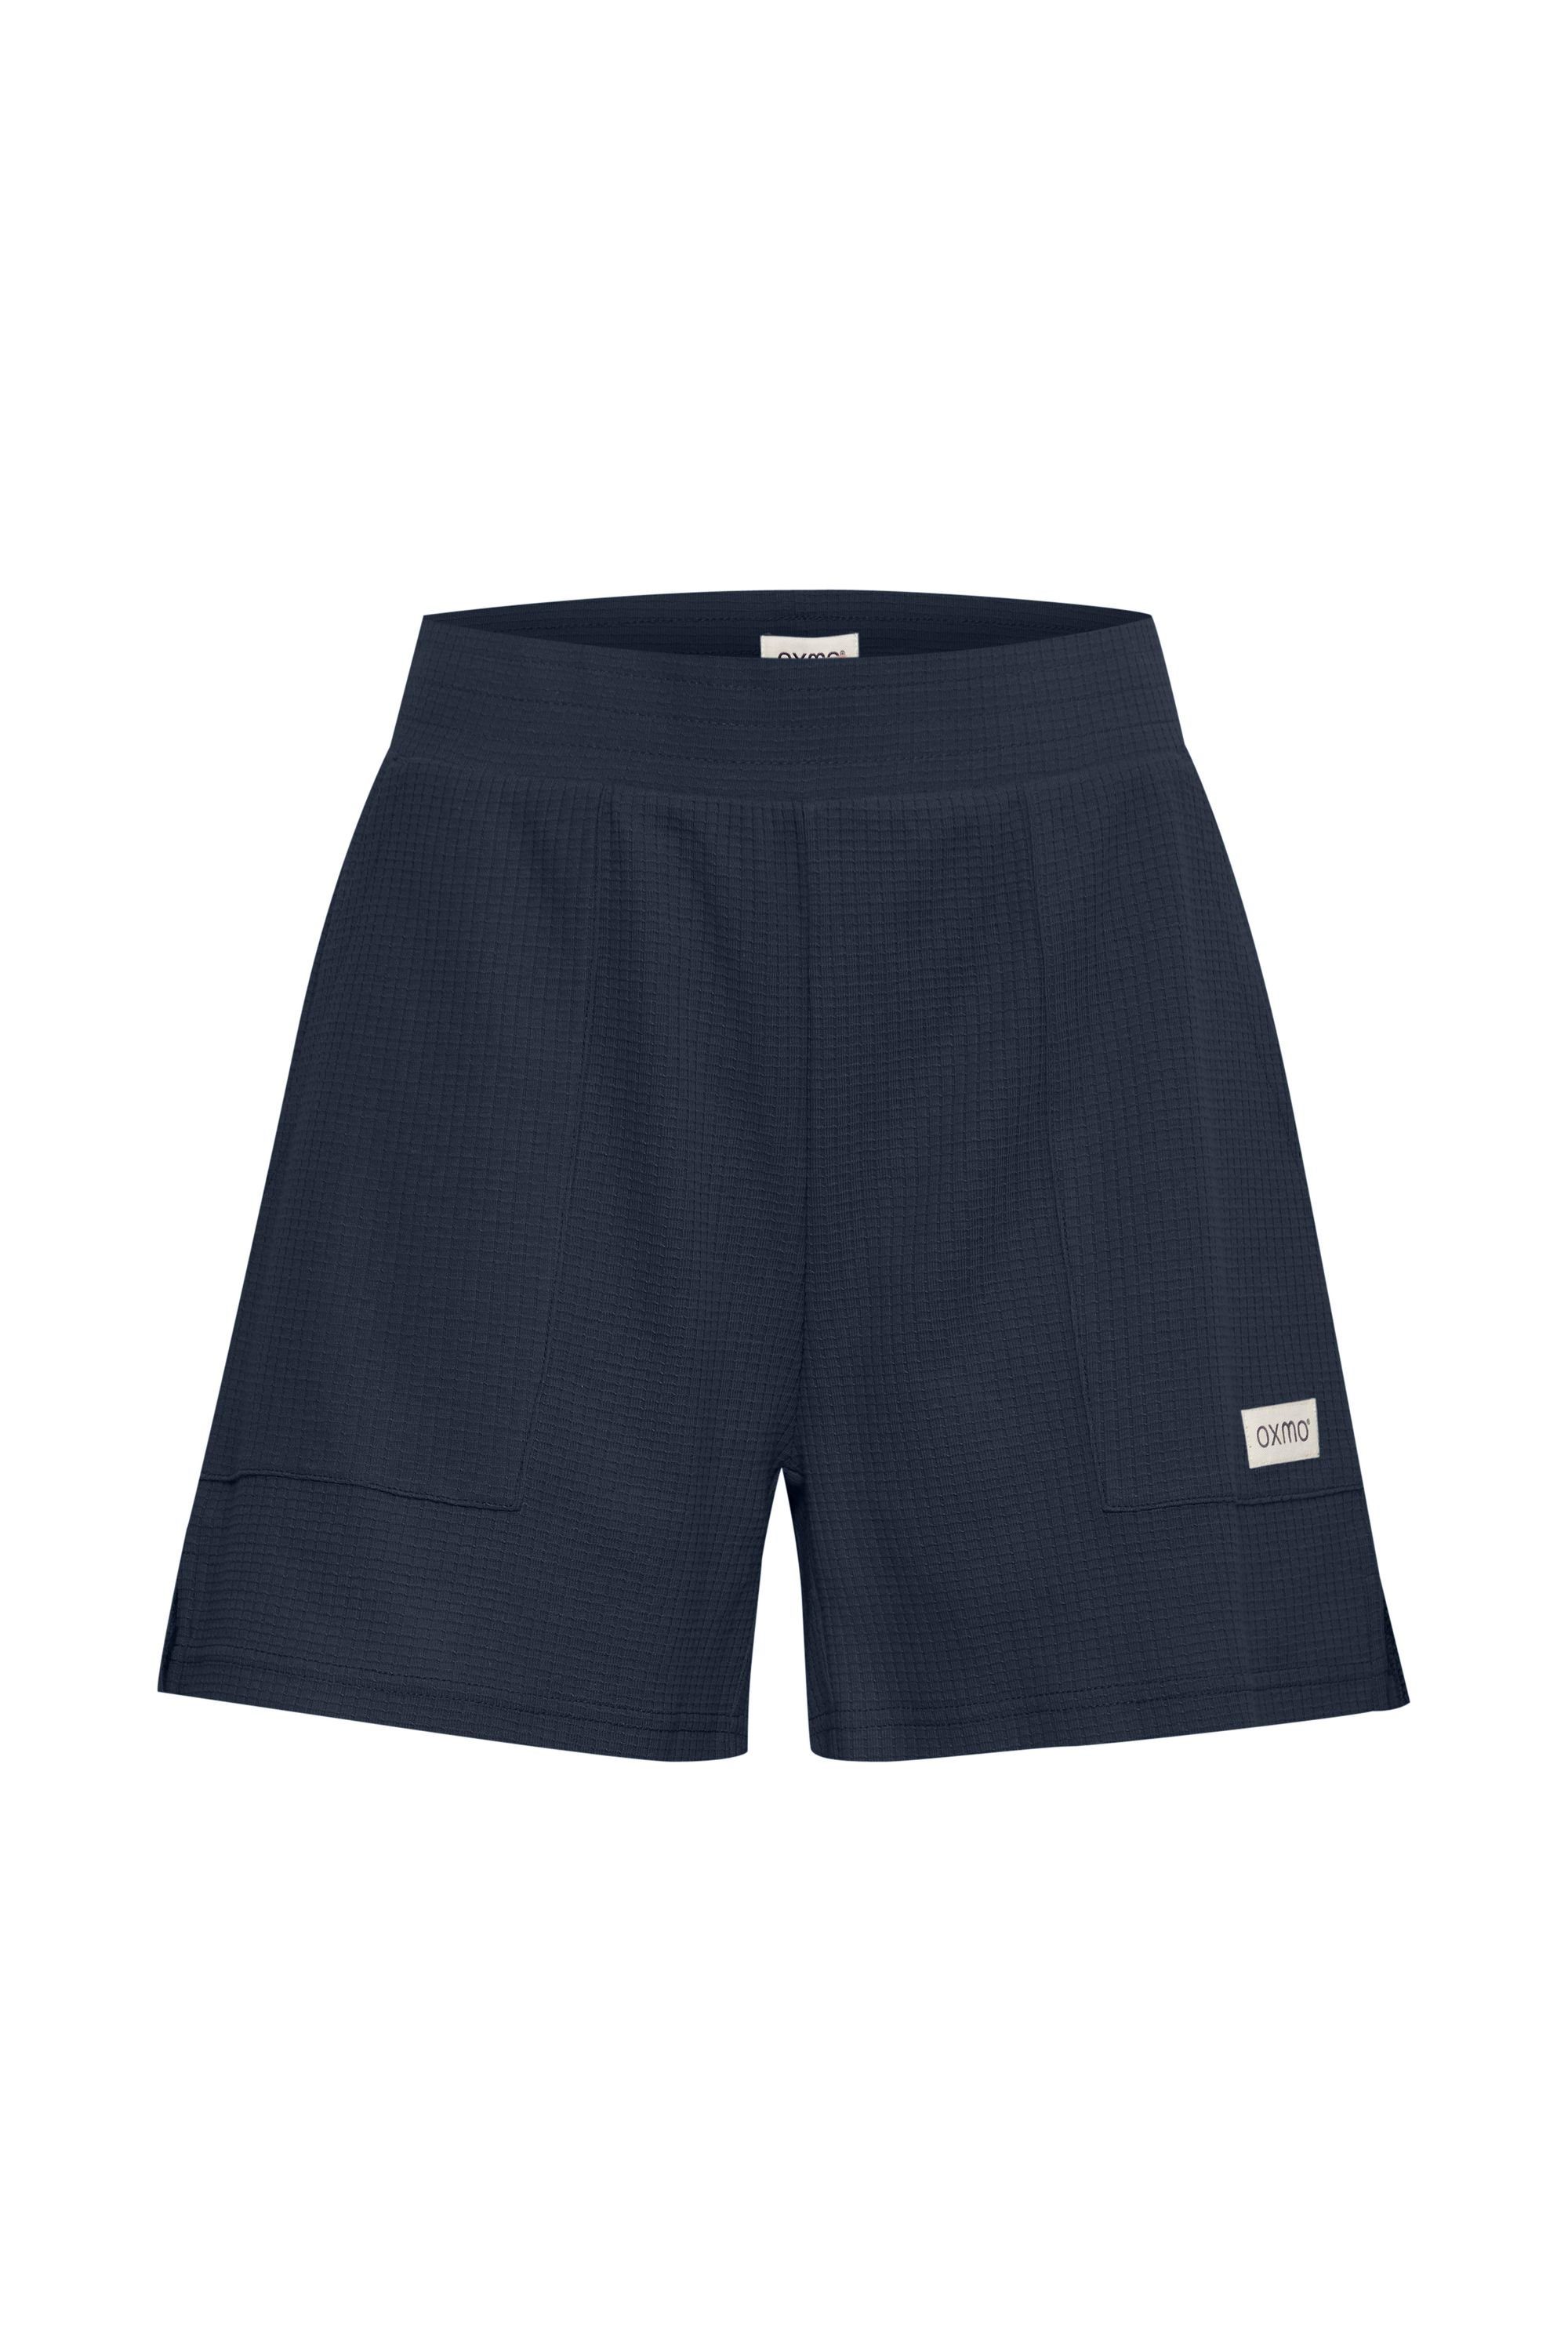 OXMO Eclipse Shorts Total Wim (194010)